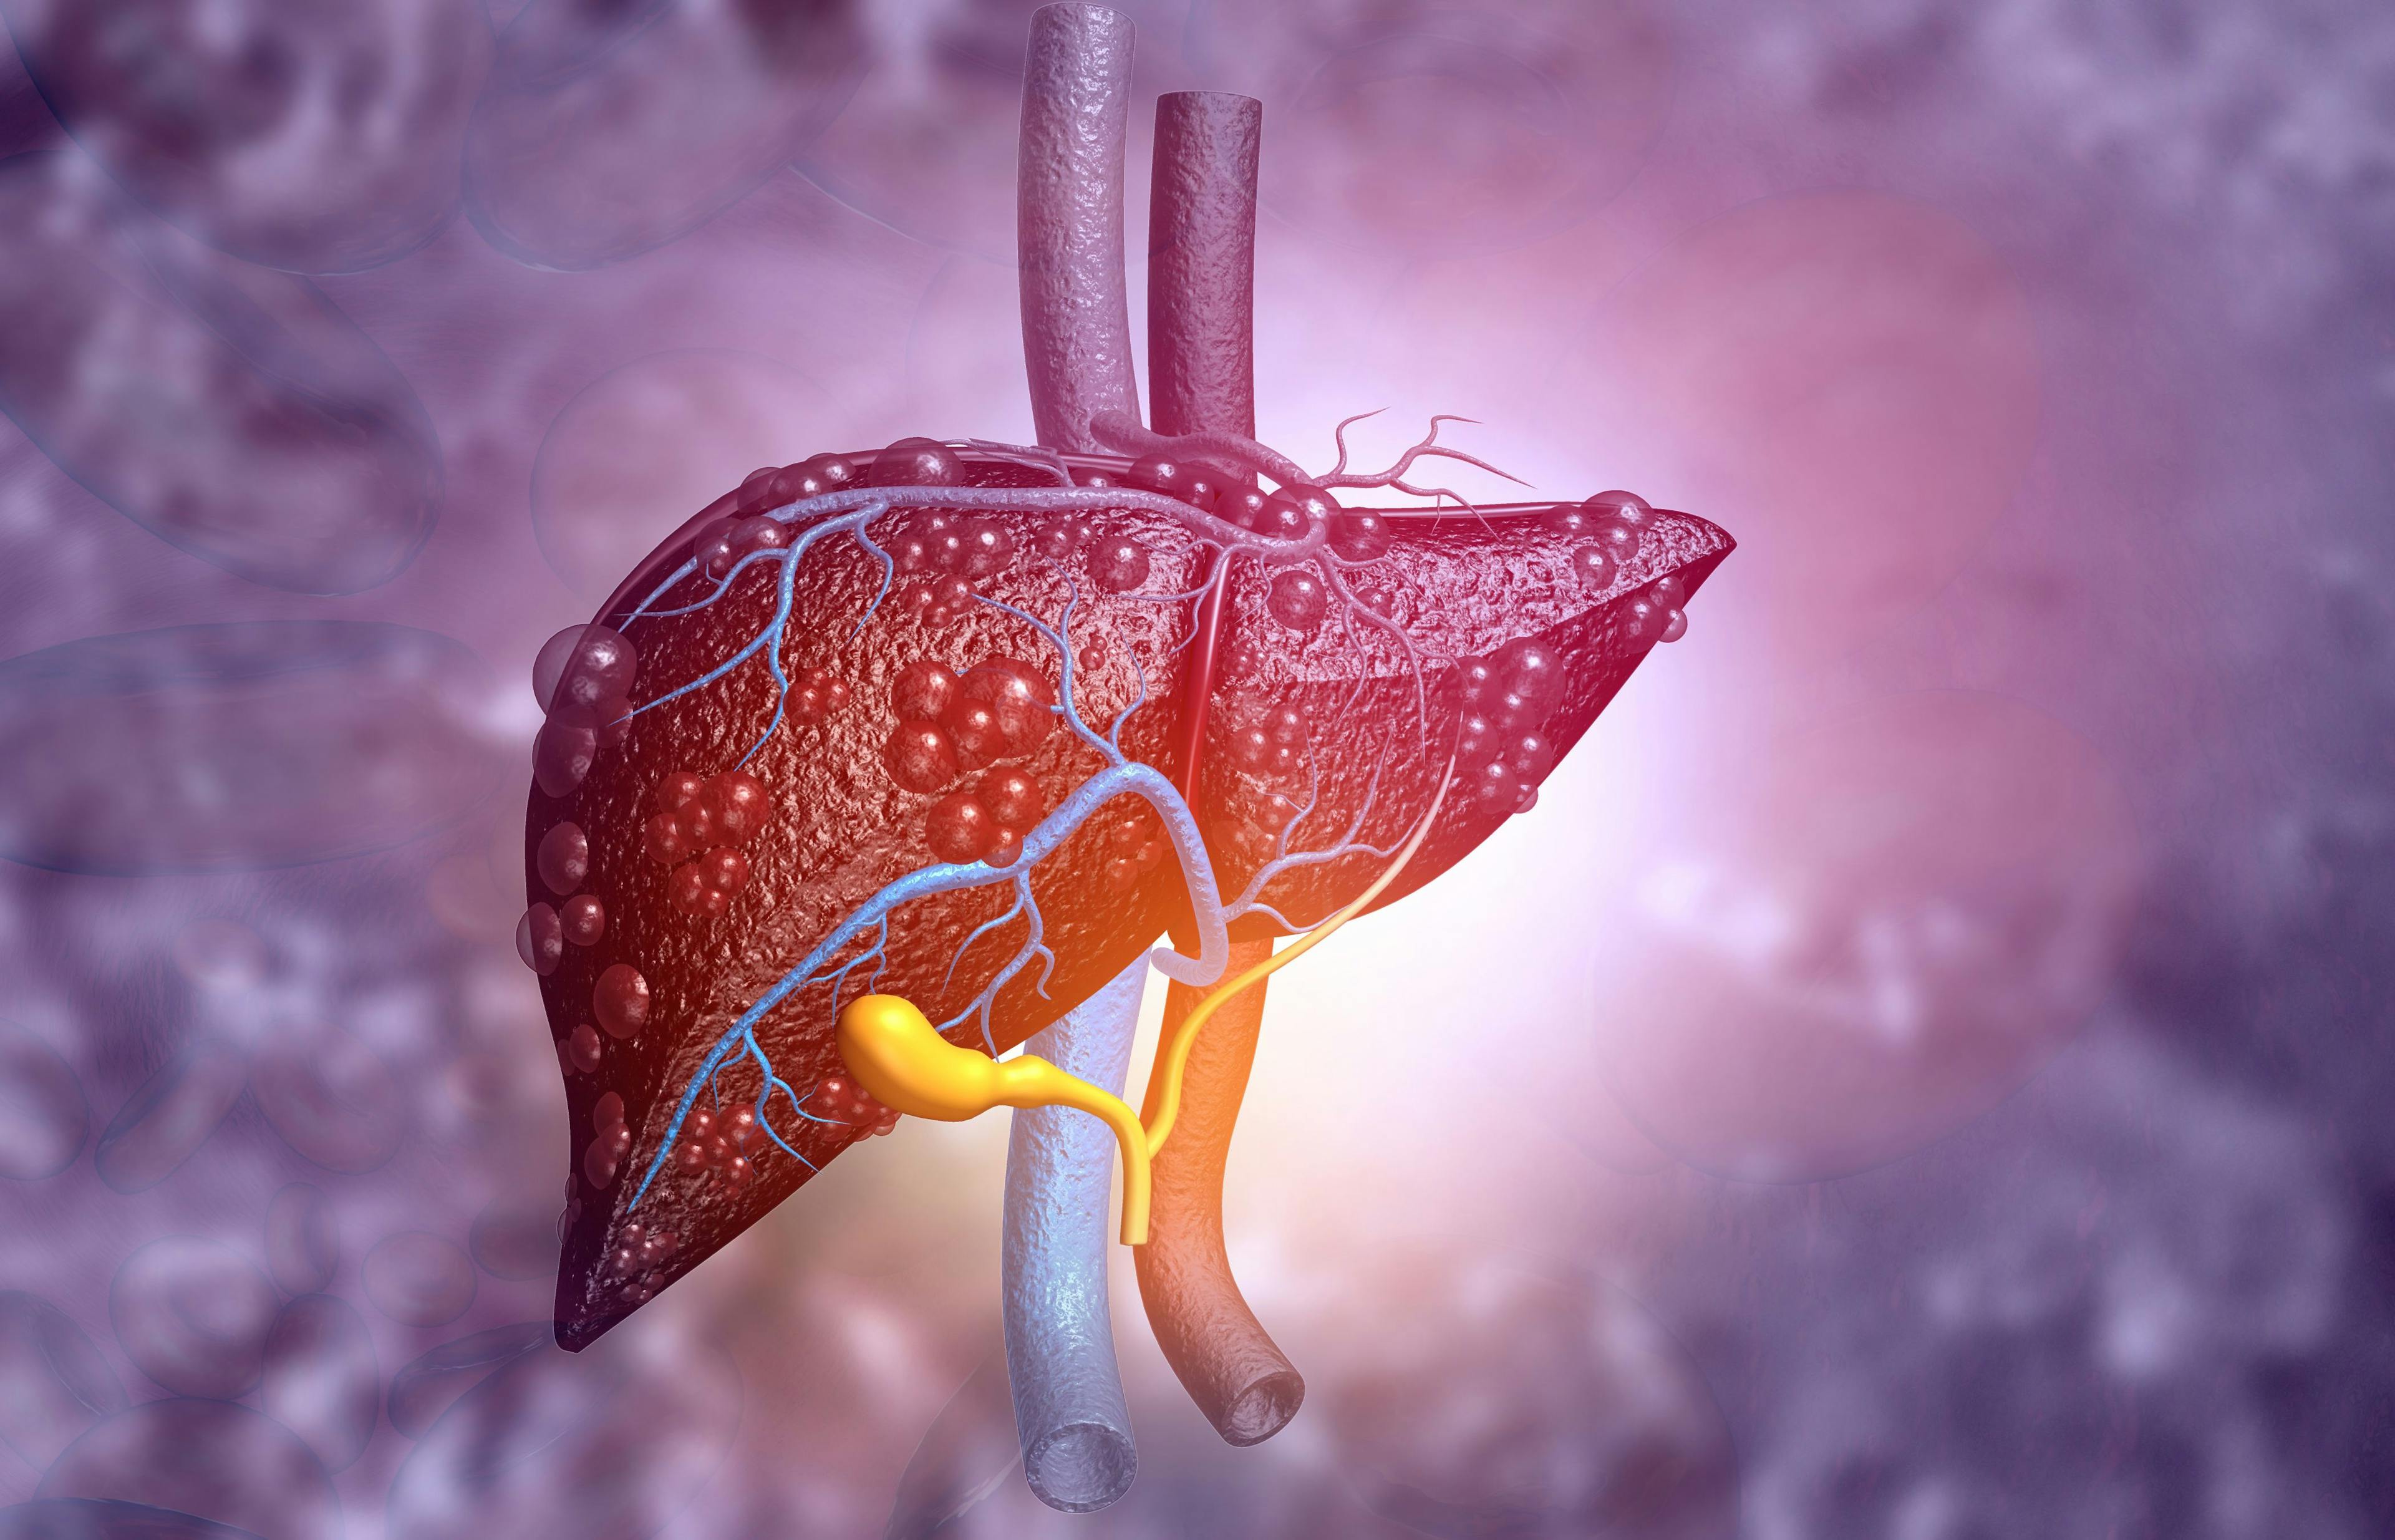 3d illustration of Abstract medical background with Diseased liver | Image Credit: © Rasi - stock.adobe.com